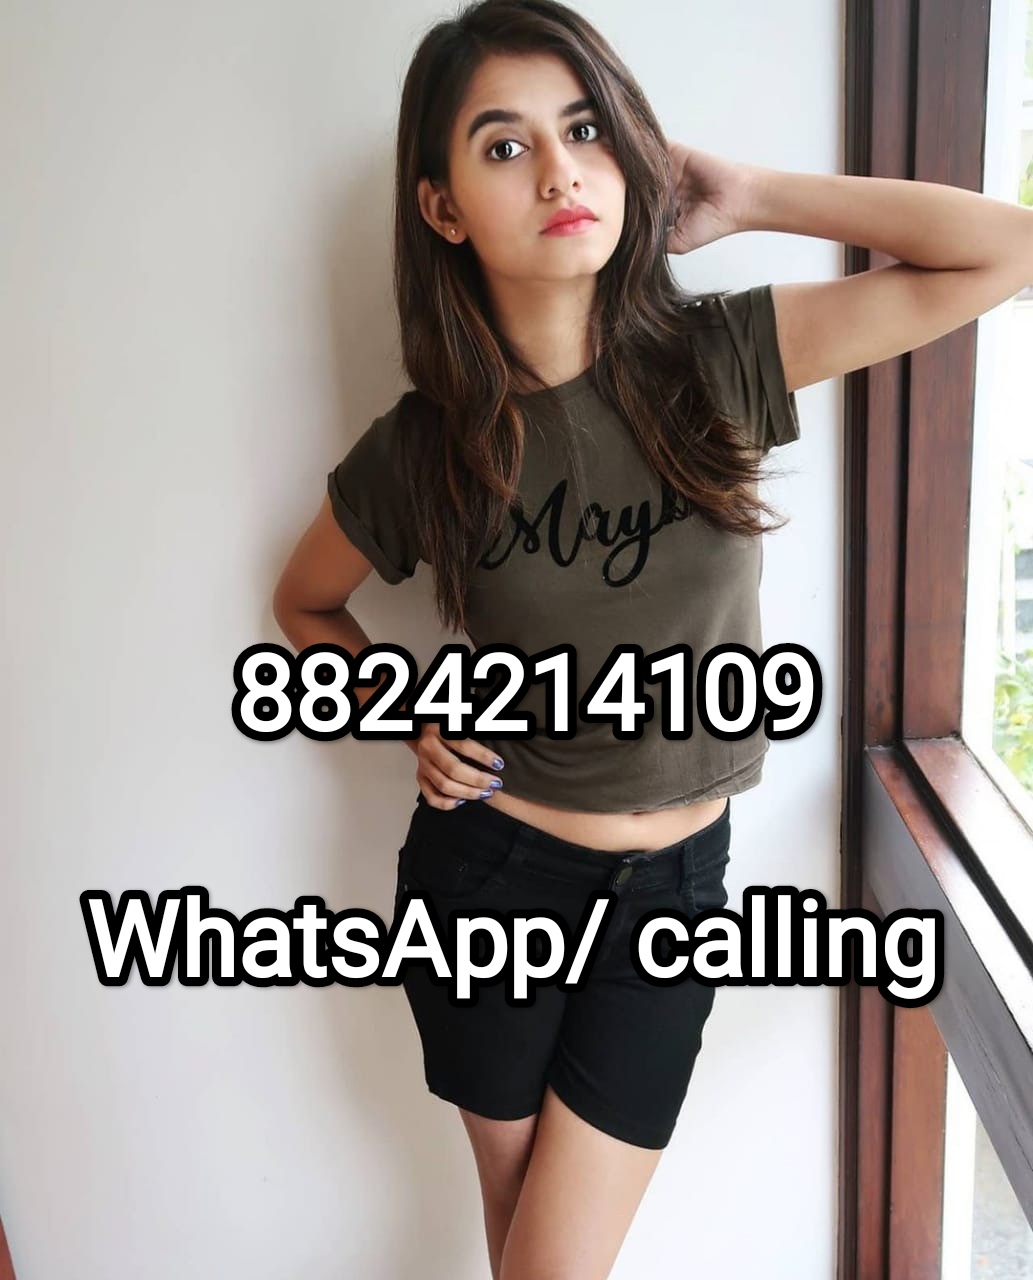 Coimbatore High profile girls with safe and satisfaction service 